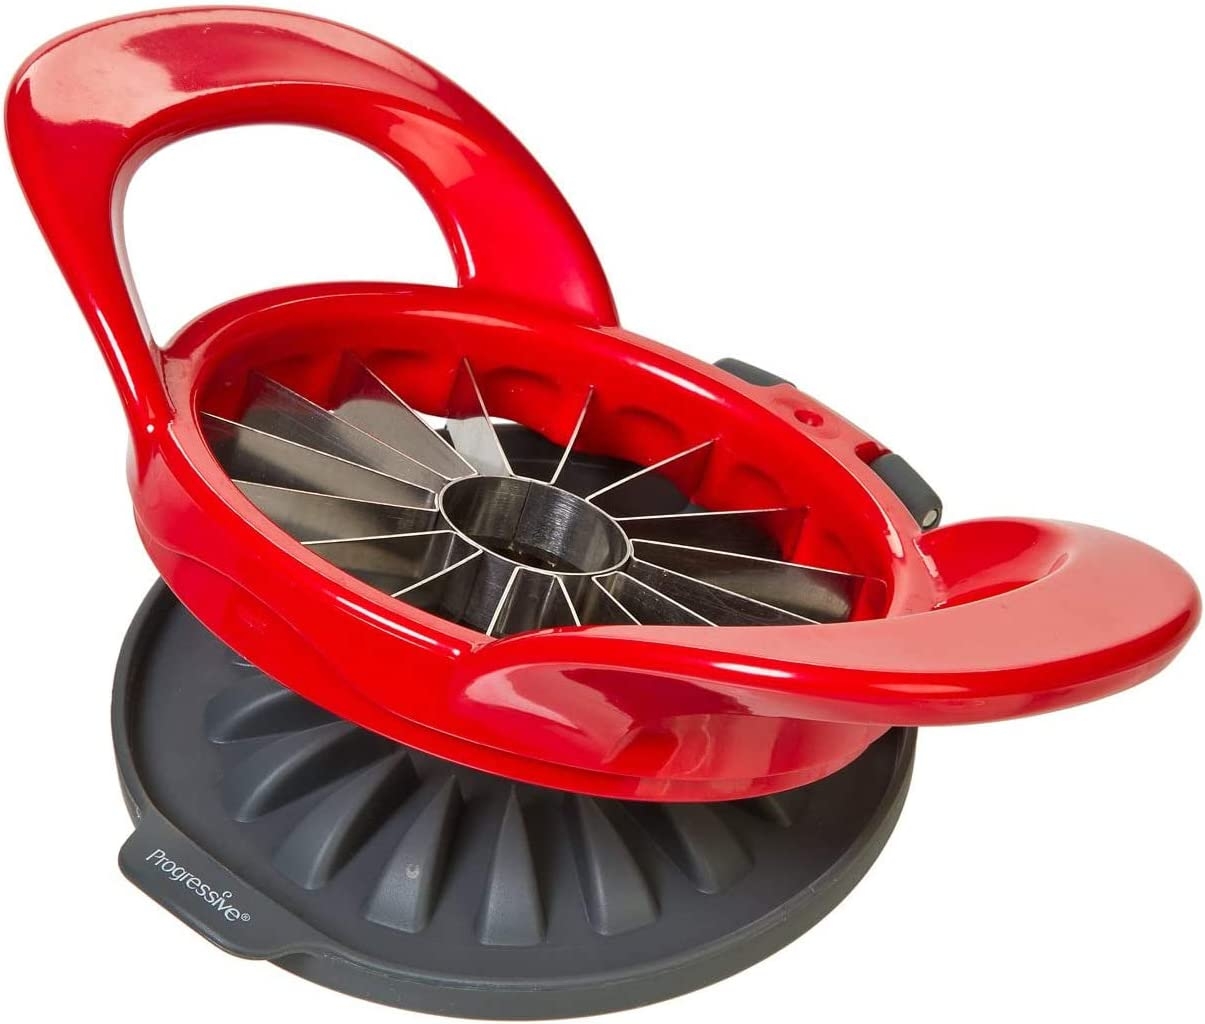 PrepWorks by Progressive Dishwasher Safe 16-Slice Thin Apple Slicer and Corer with Attached Safety Cover Import To Shop